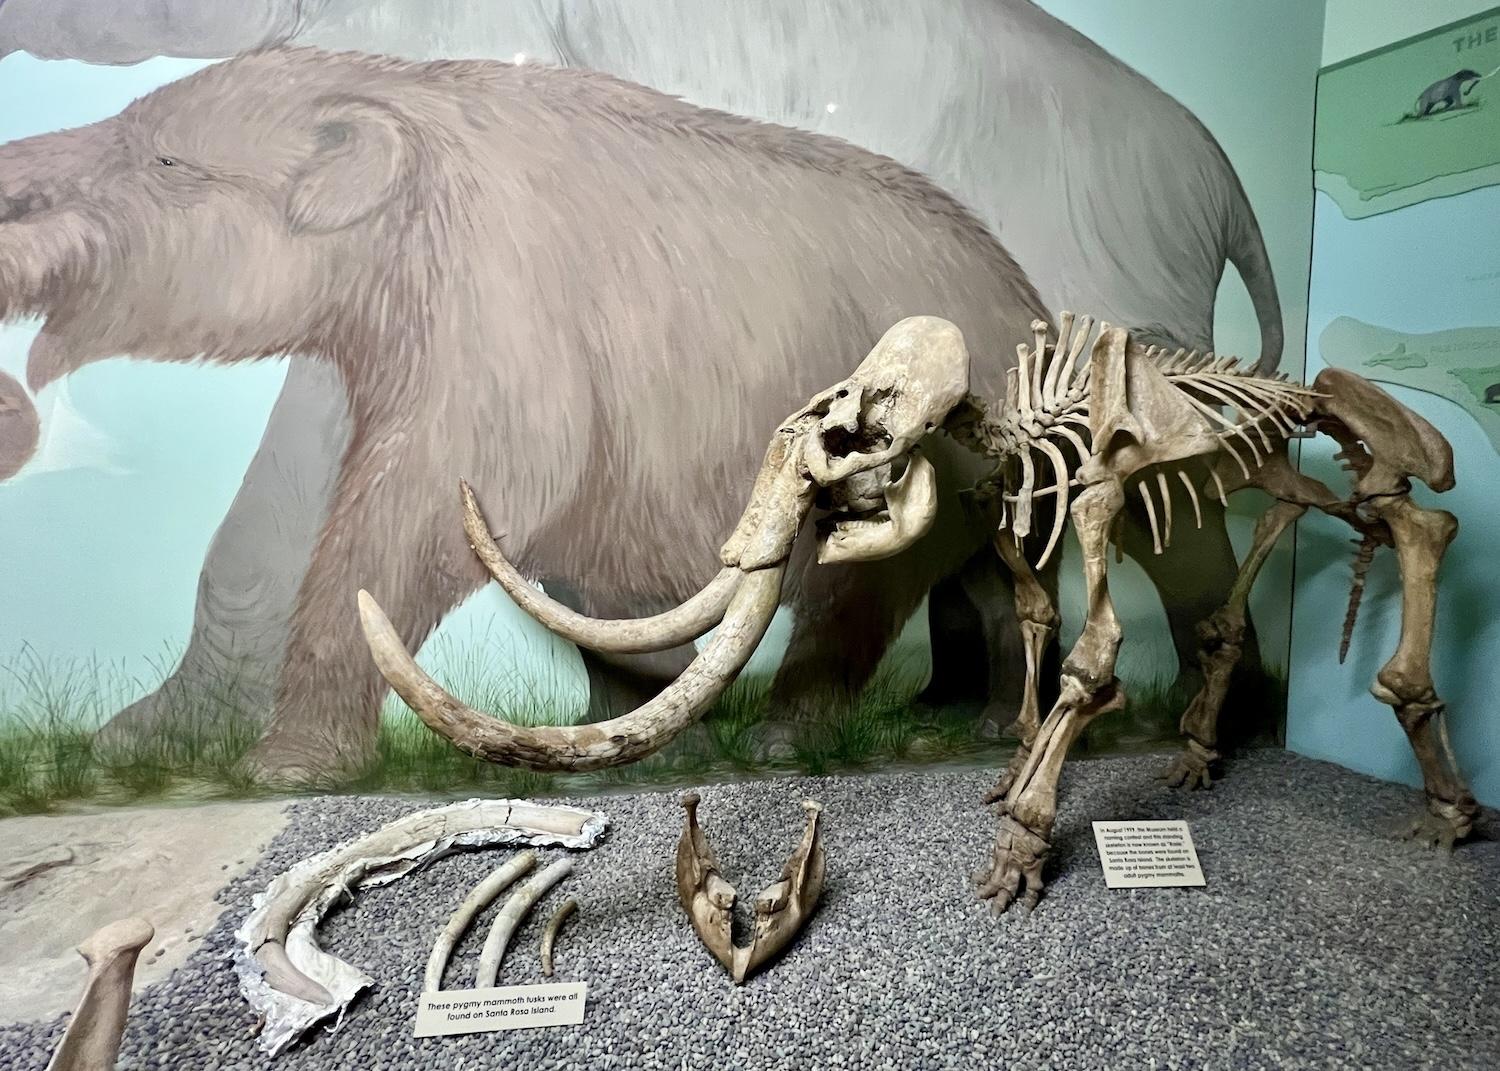 Pygmy mammoths once roamed Santa Rosa Island in Channel Islands National Park. Learn more at the Santa Barbara Museum of Natural History.